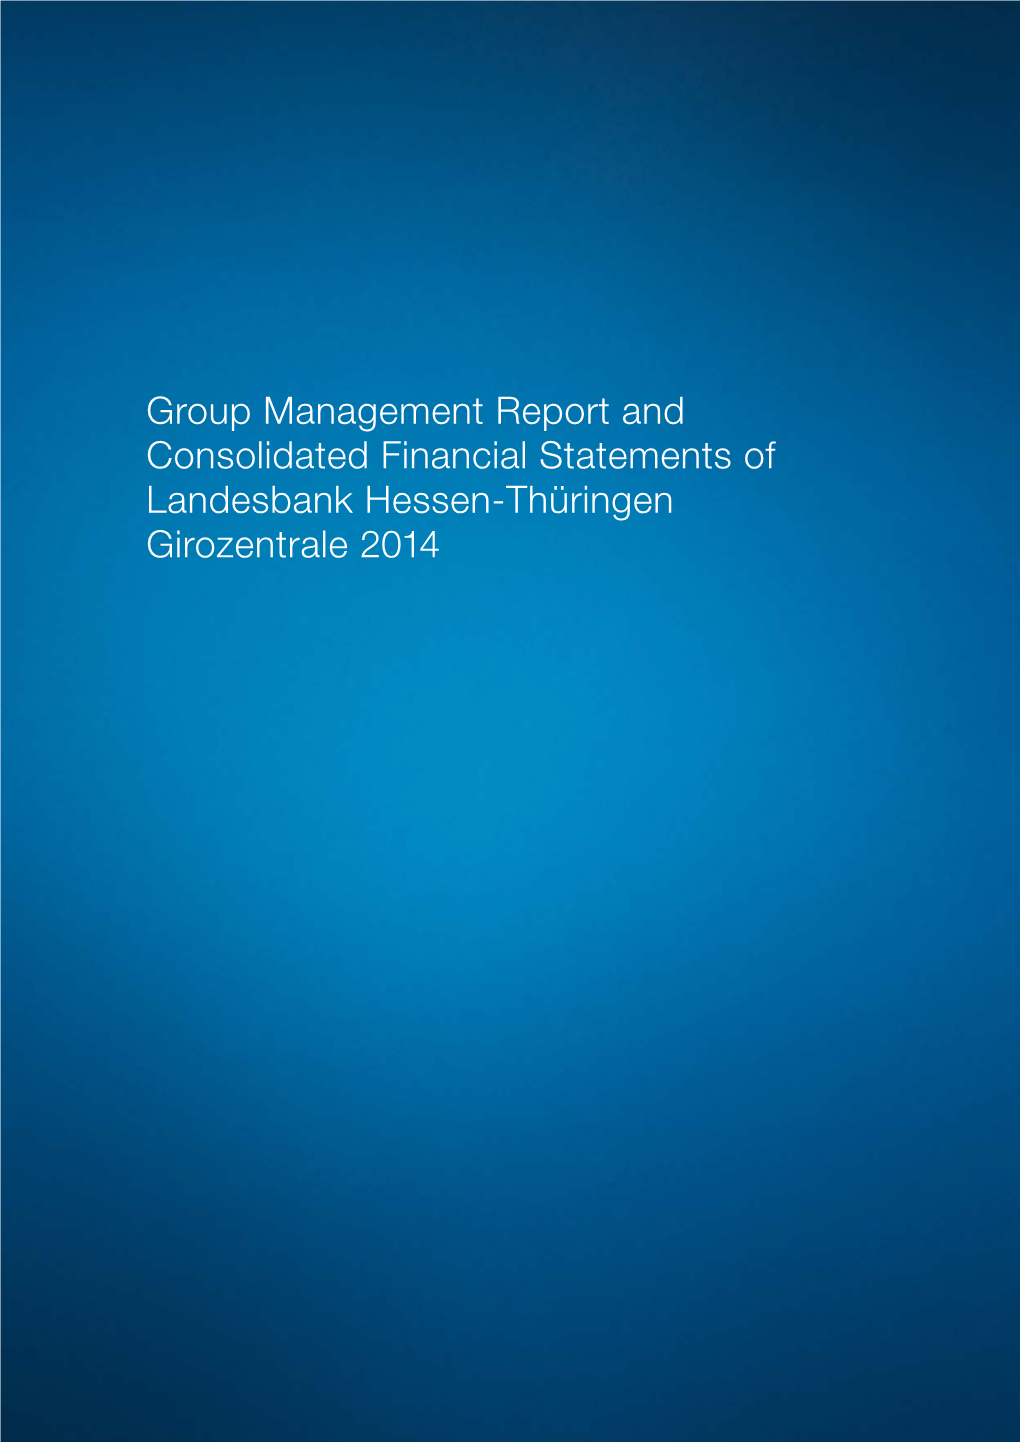 Group Management Report and Consolidated Financial Statements of Landesbank Hessen-Thüringen Girozentrale 2014 A-1